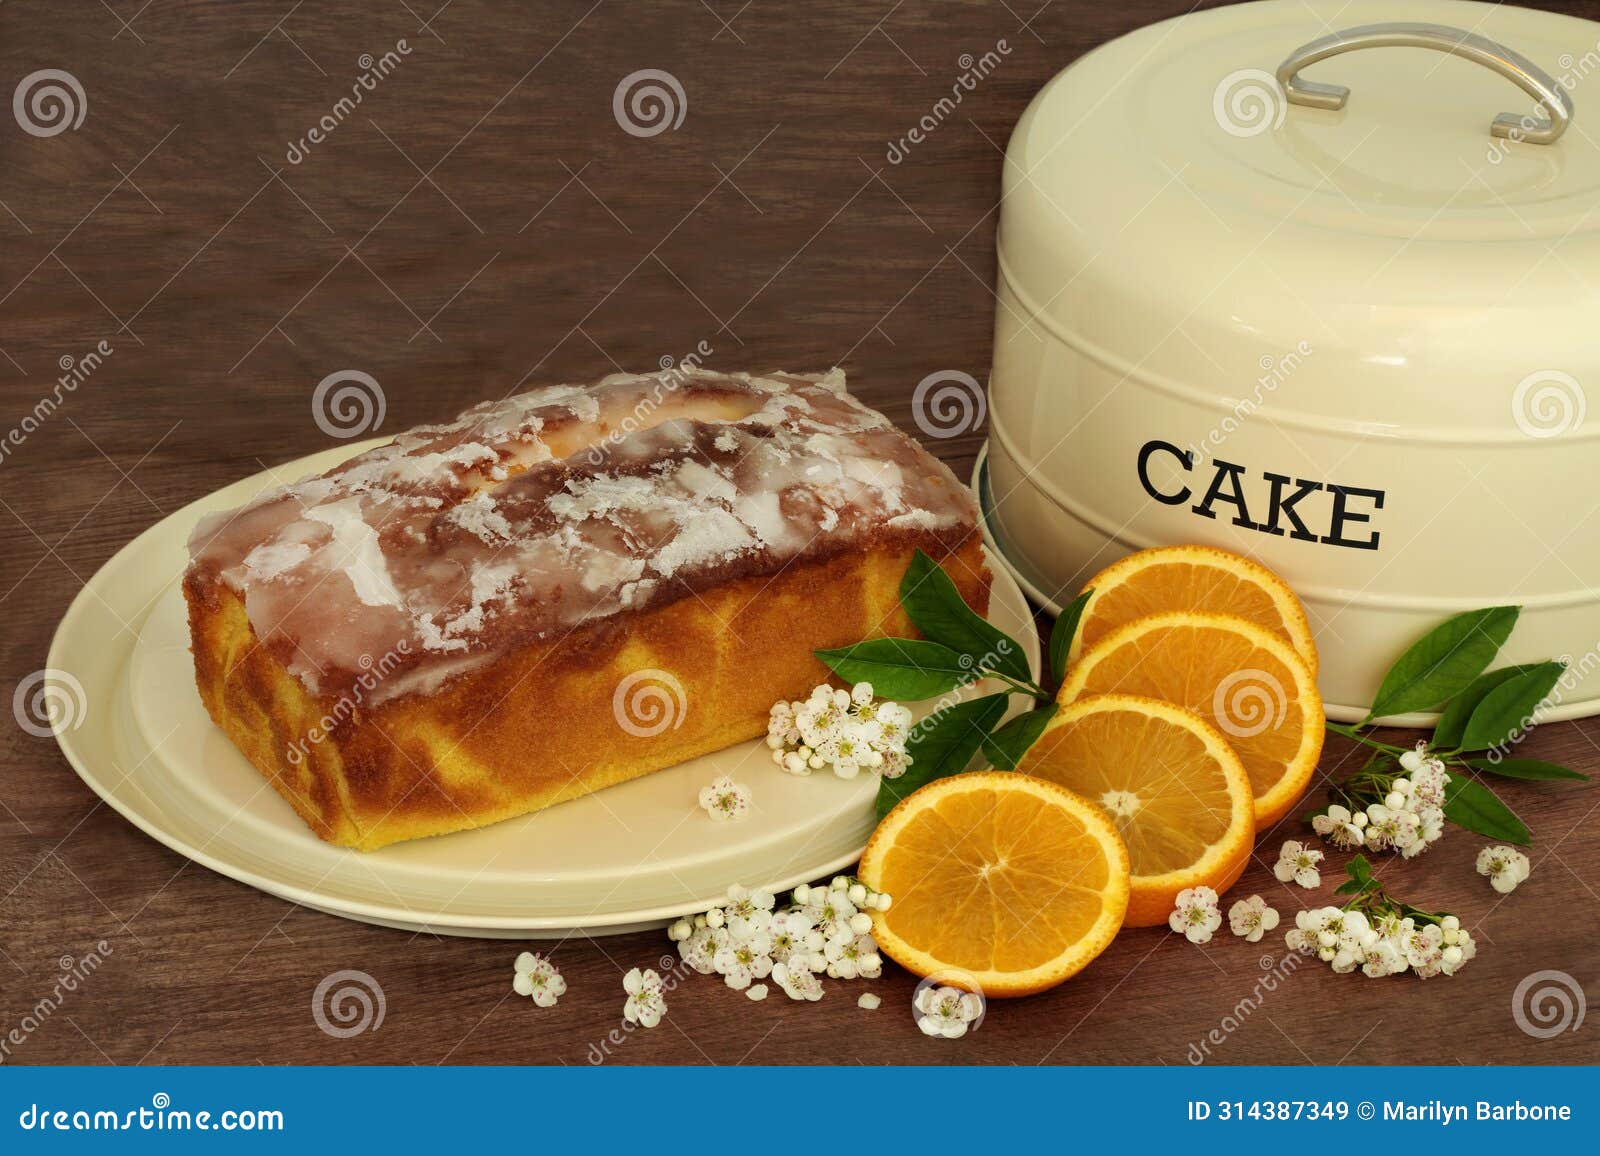 orange drizzle cake with fruit and blossom flowers